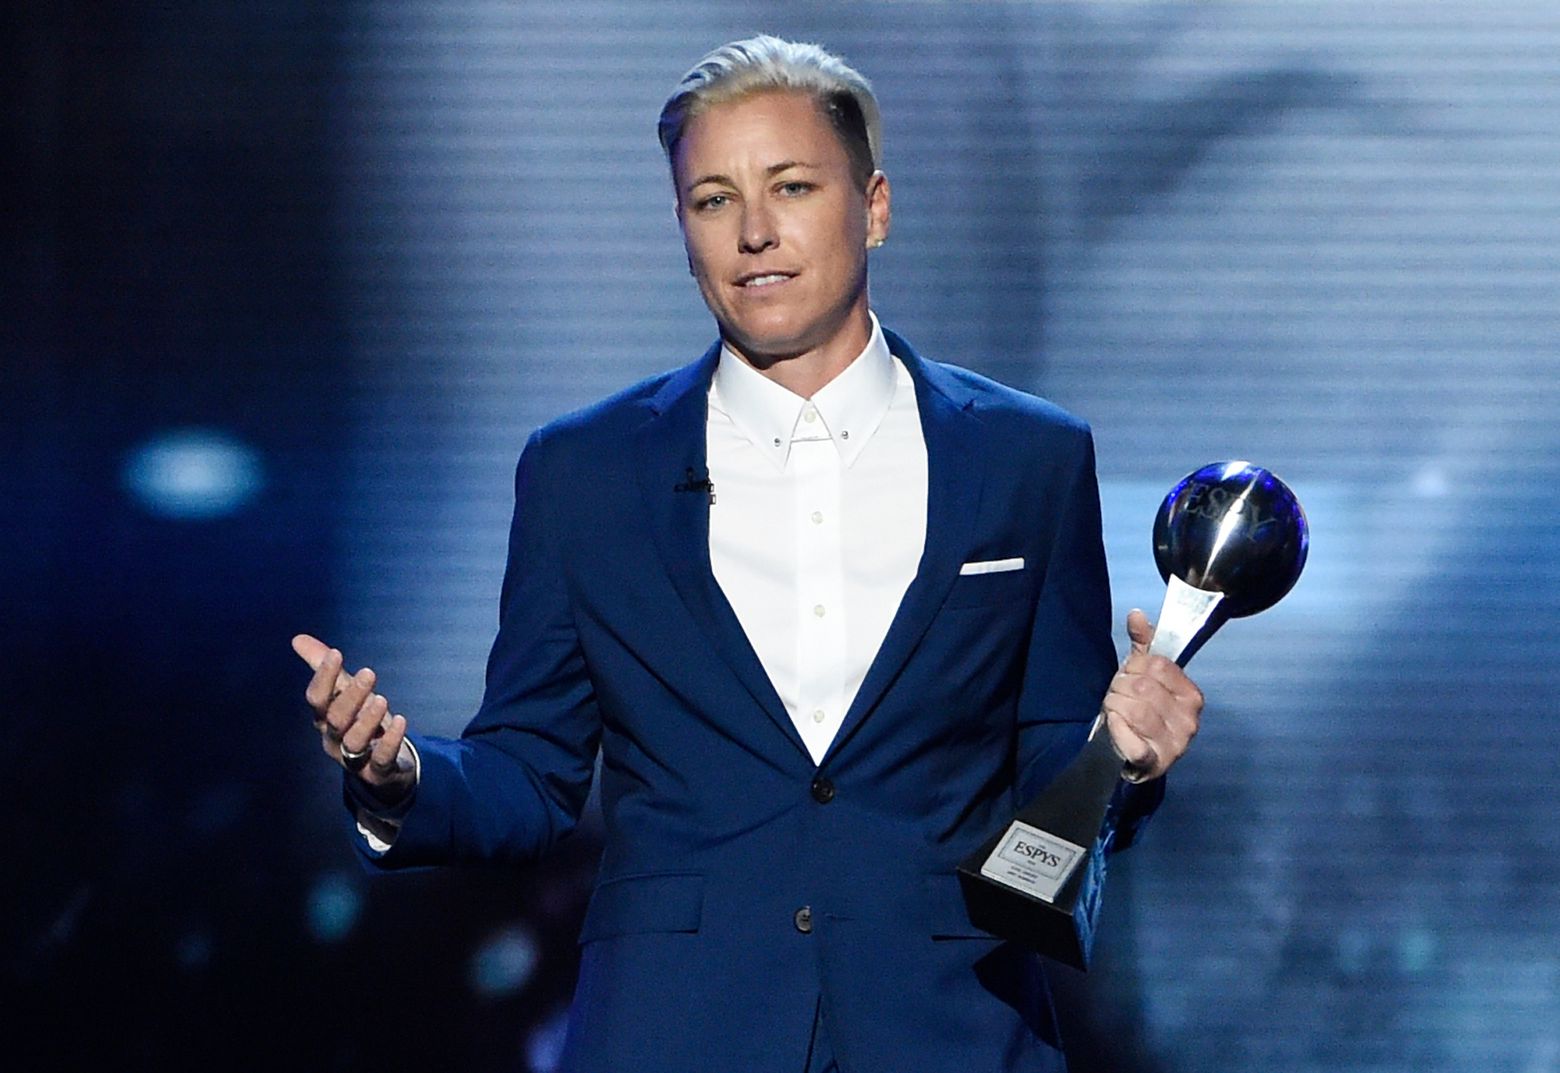 Abby Wambach Still Has to Explain World Cup Games to Wife Glennon Doyle